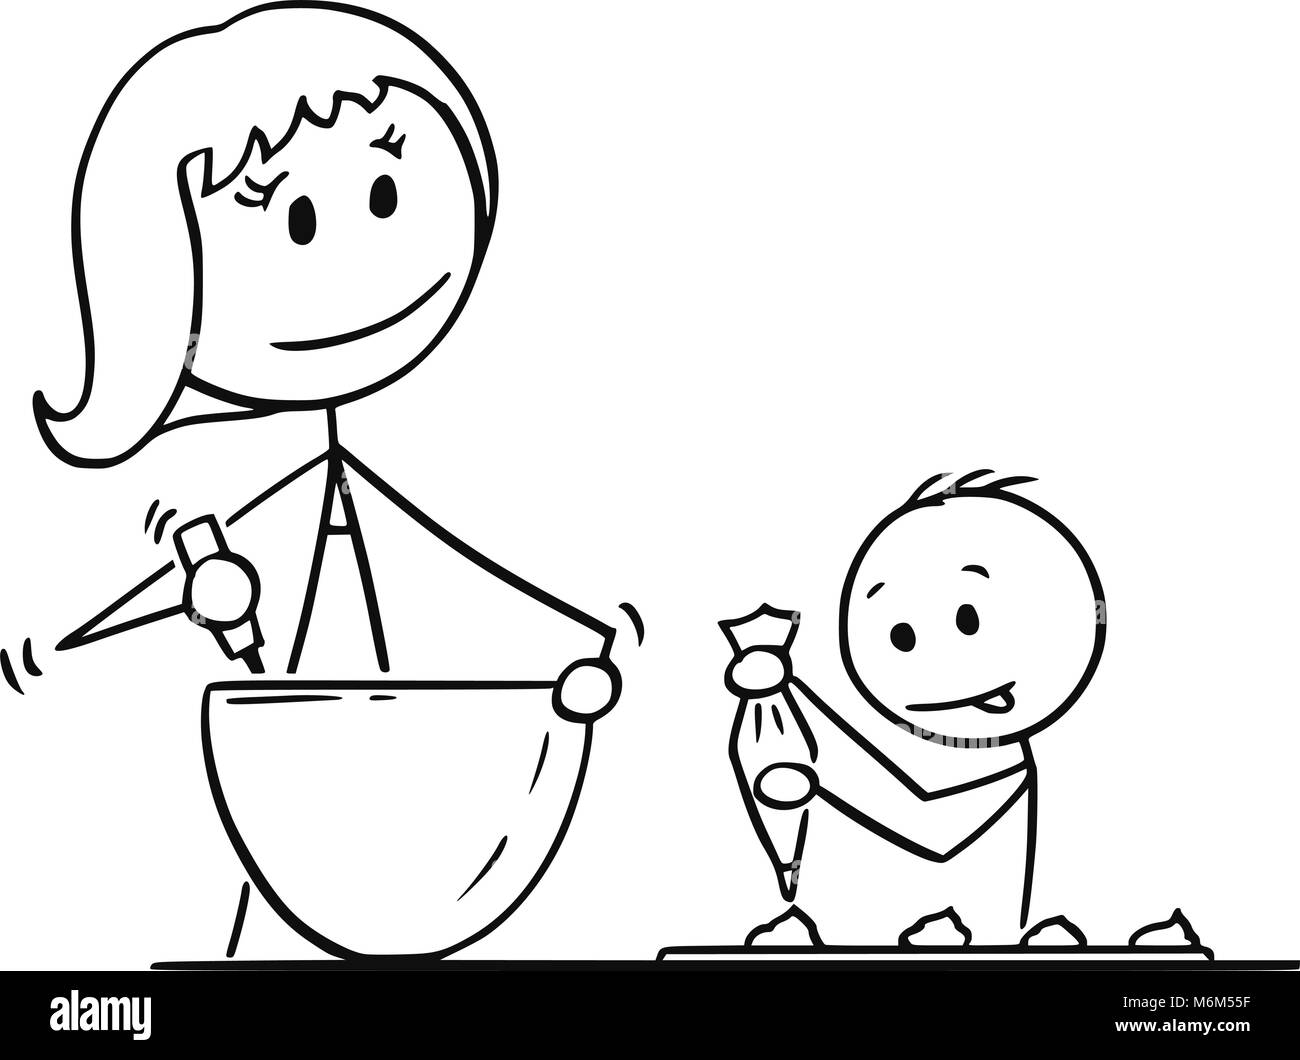 Cartoon of Mother and Son Cooking or Baking Together Stock Vector